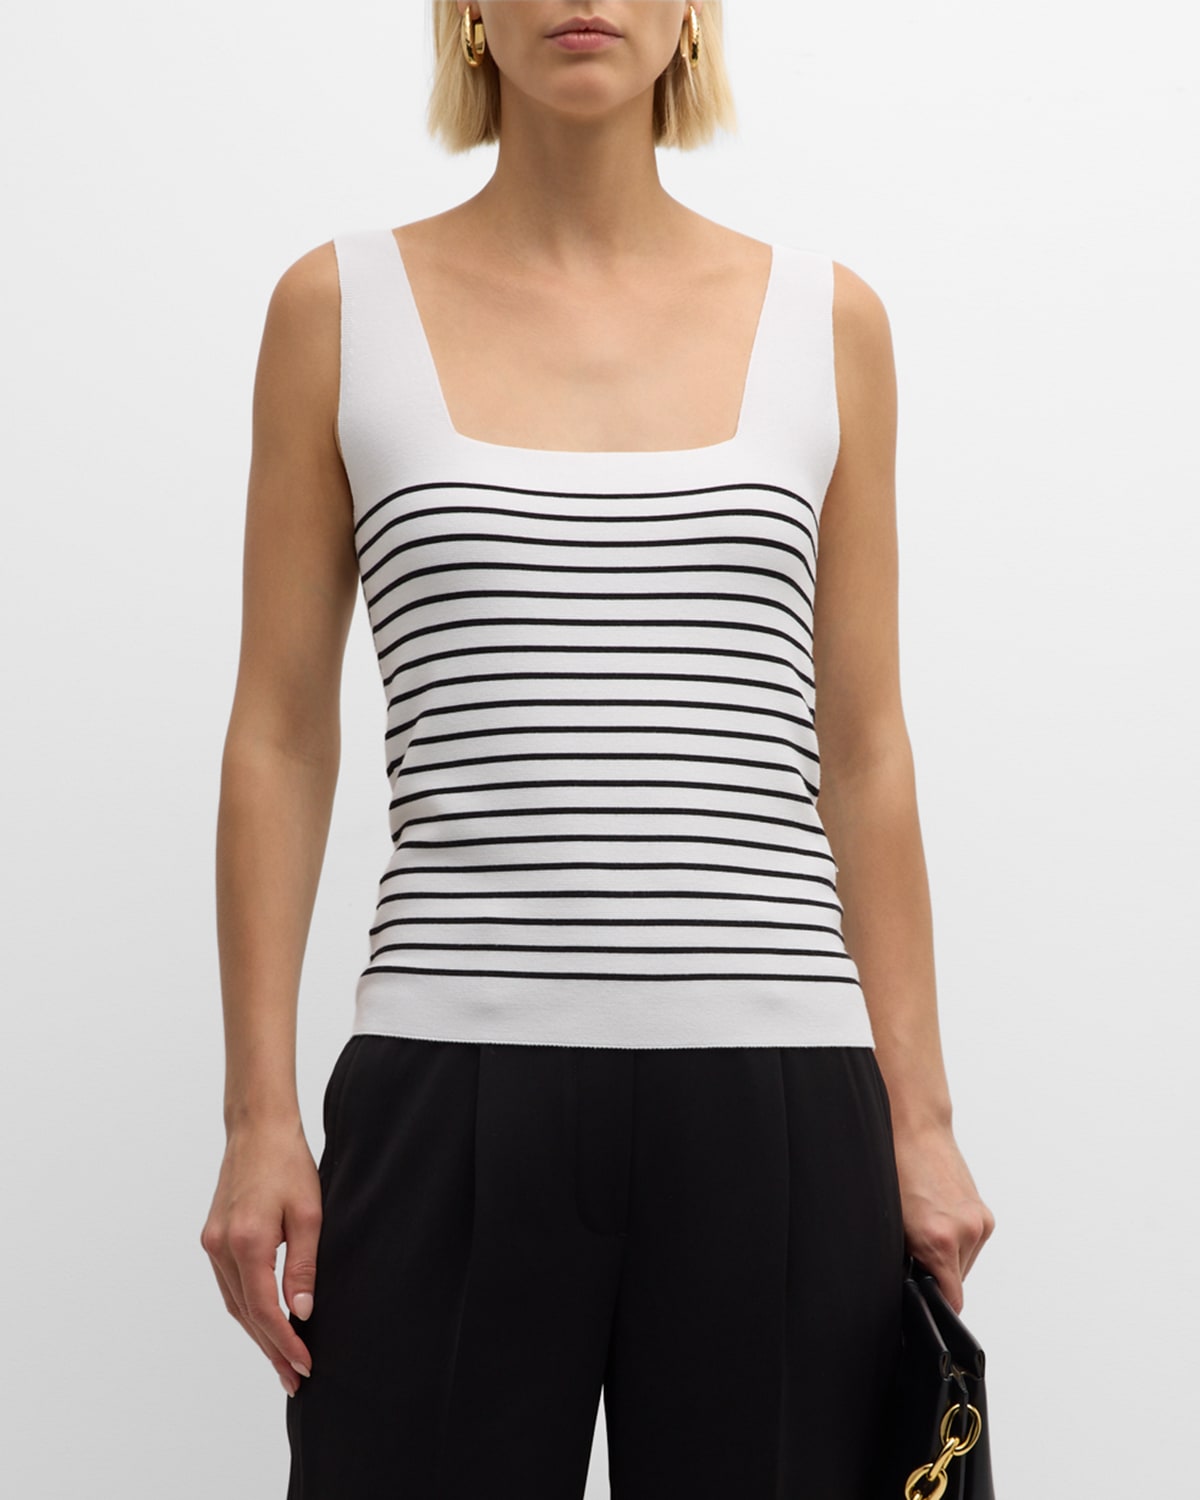 The Ellie Striped Square-Neck Sweater Tank